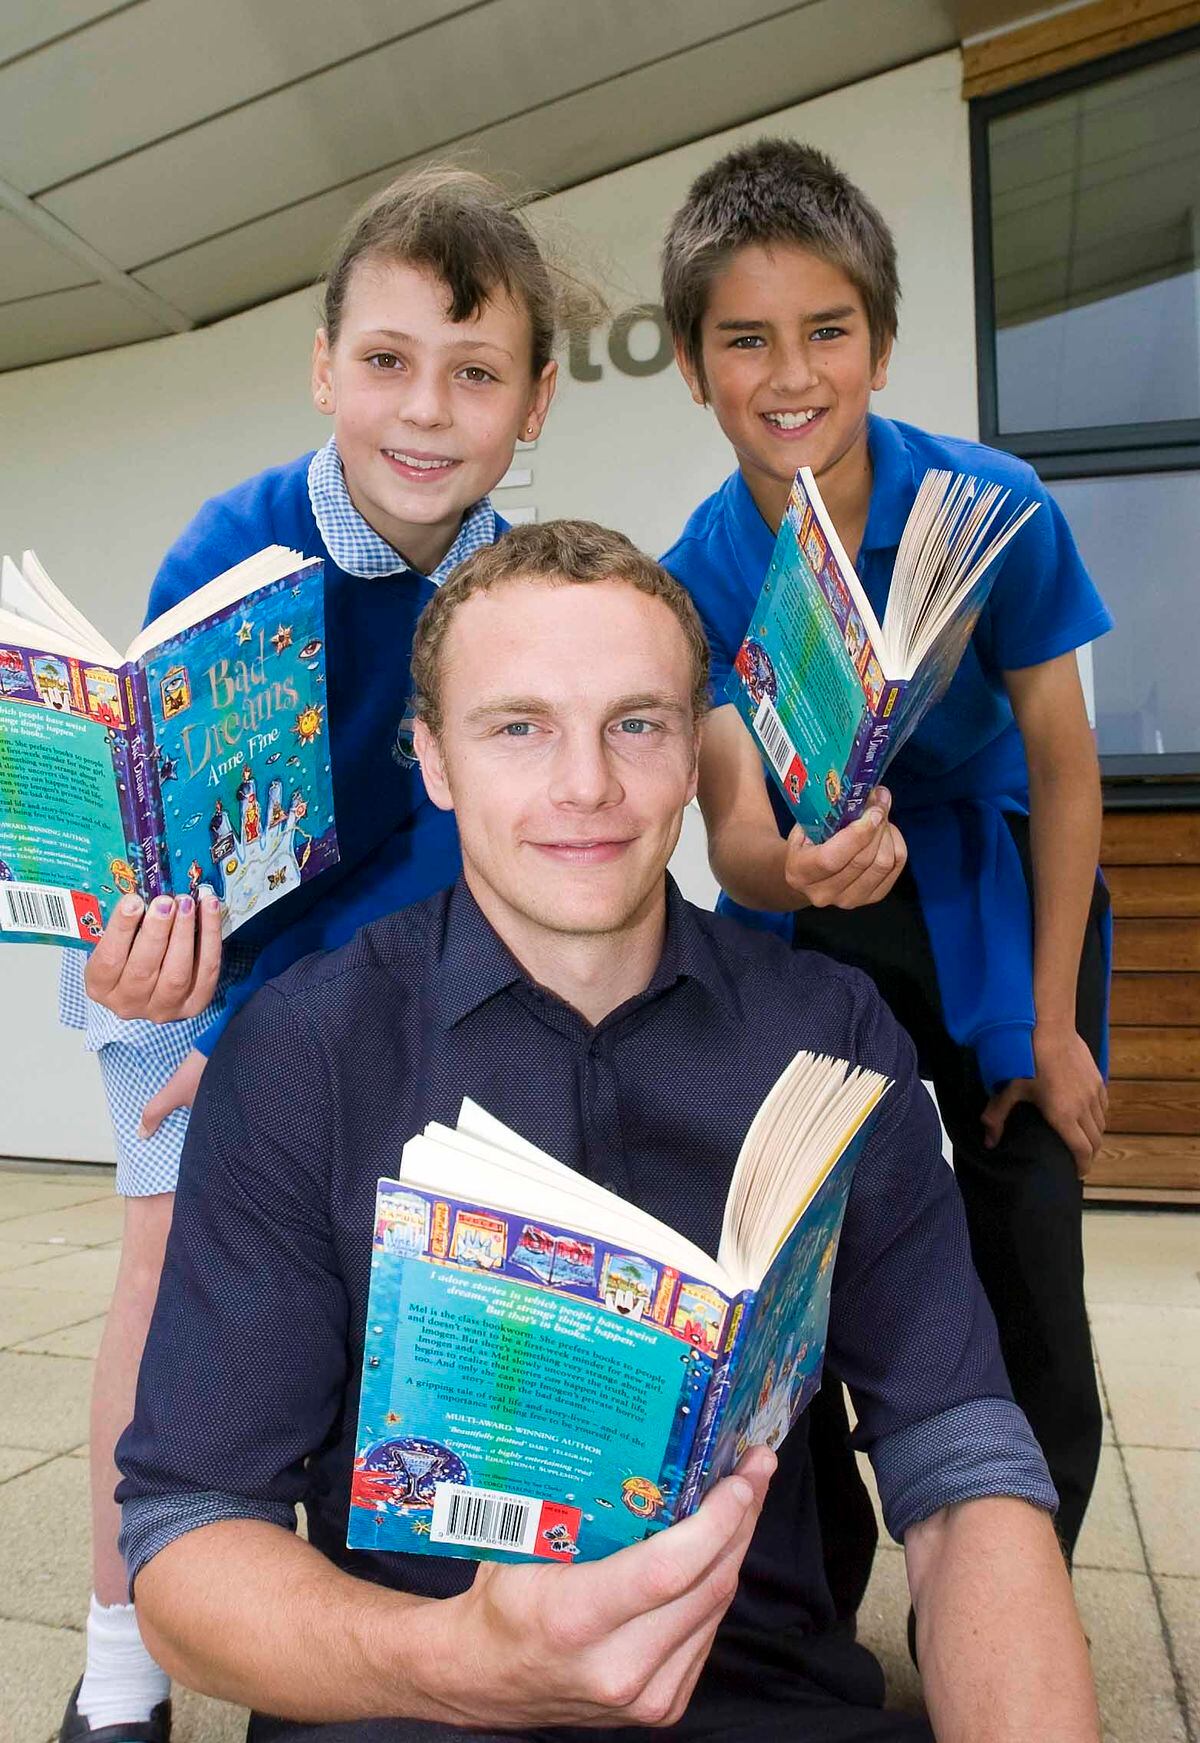 SAME DAY Sam Aiston, who has started his teaching roll at Bicton Primary School, pictured with pupils Chloe Jones, 11, and DanAdams, 11.PIC PETER SHAH